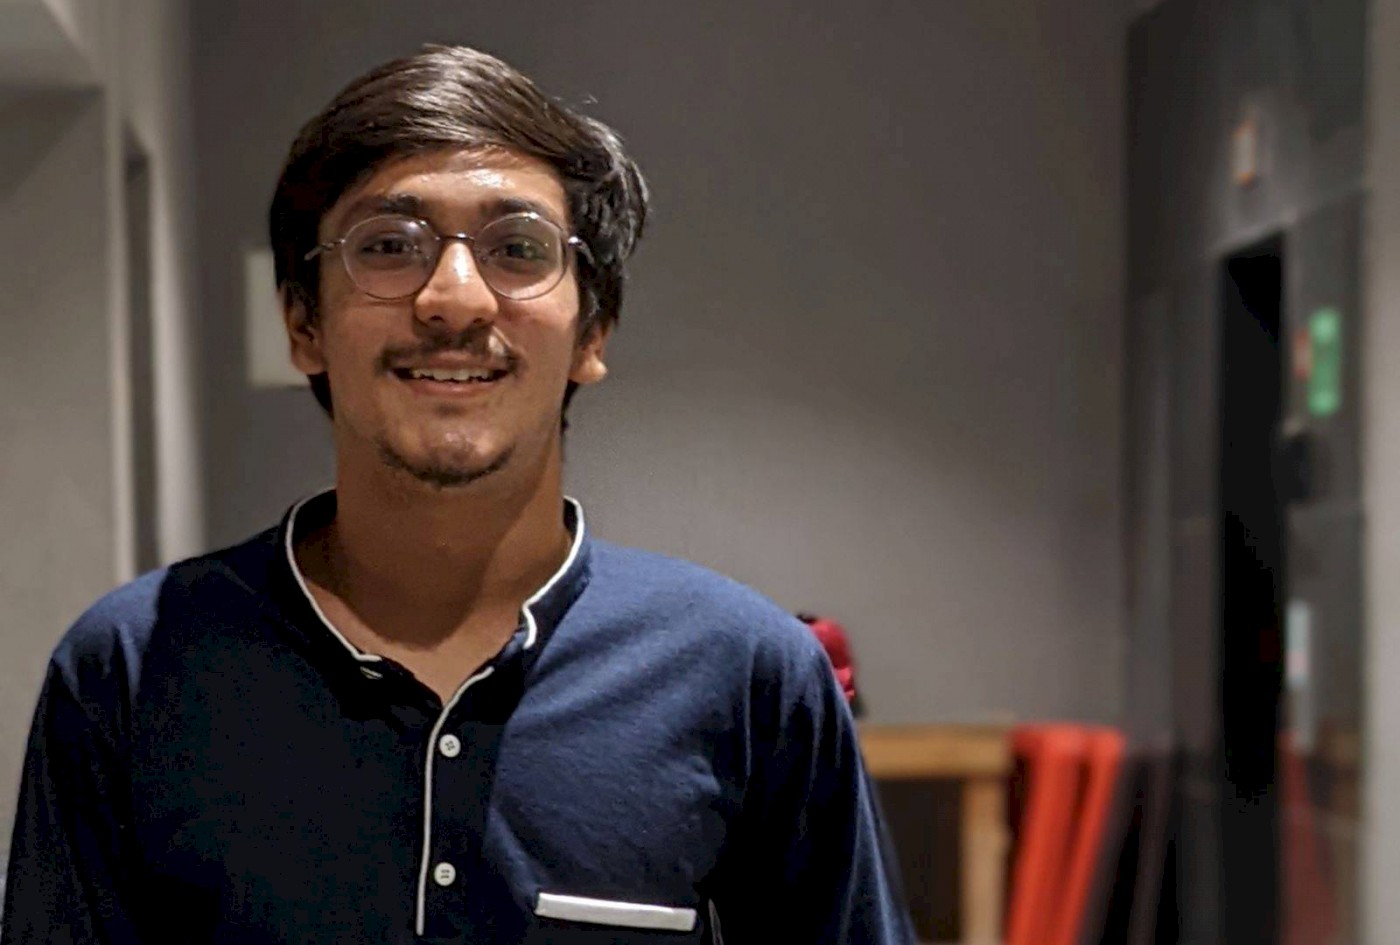 Dhruv Shah Secures Admission to the University of Massachusetts Boston